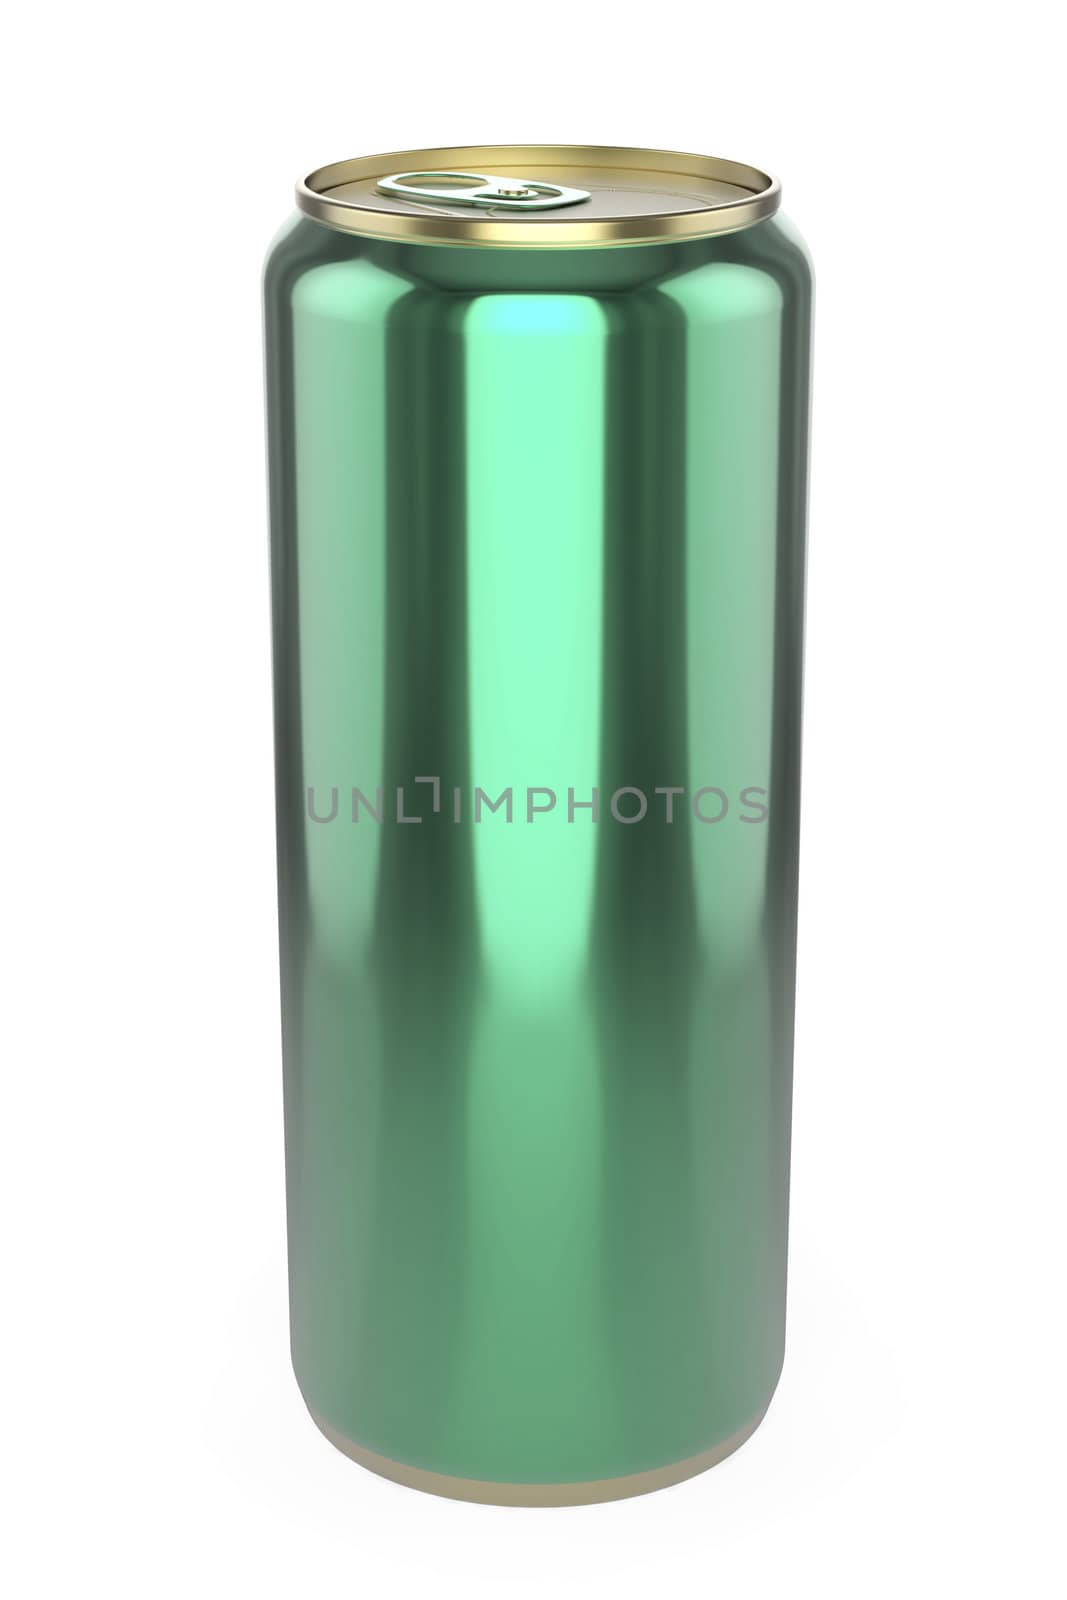 Green beer can by magraphics